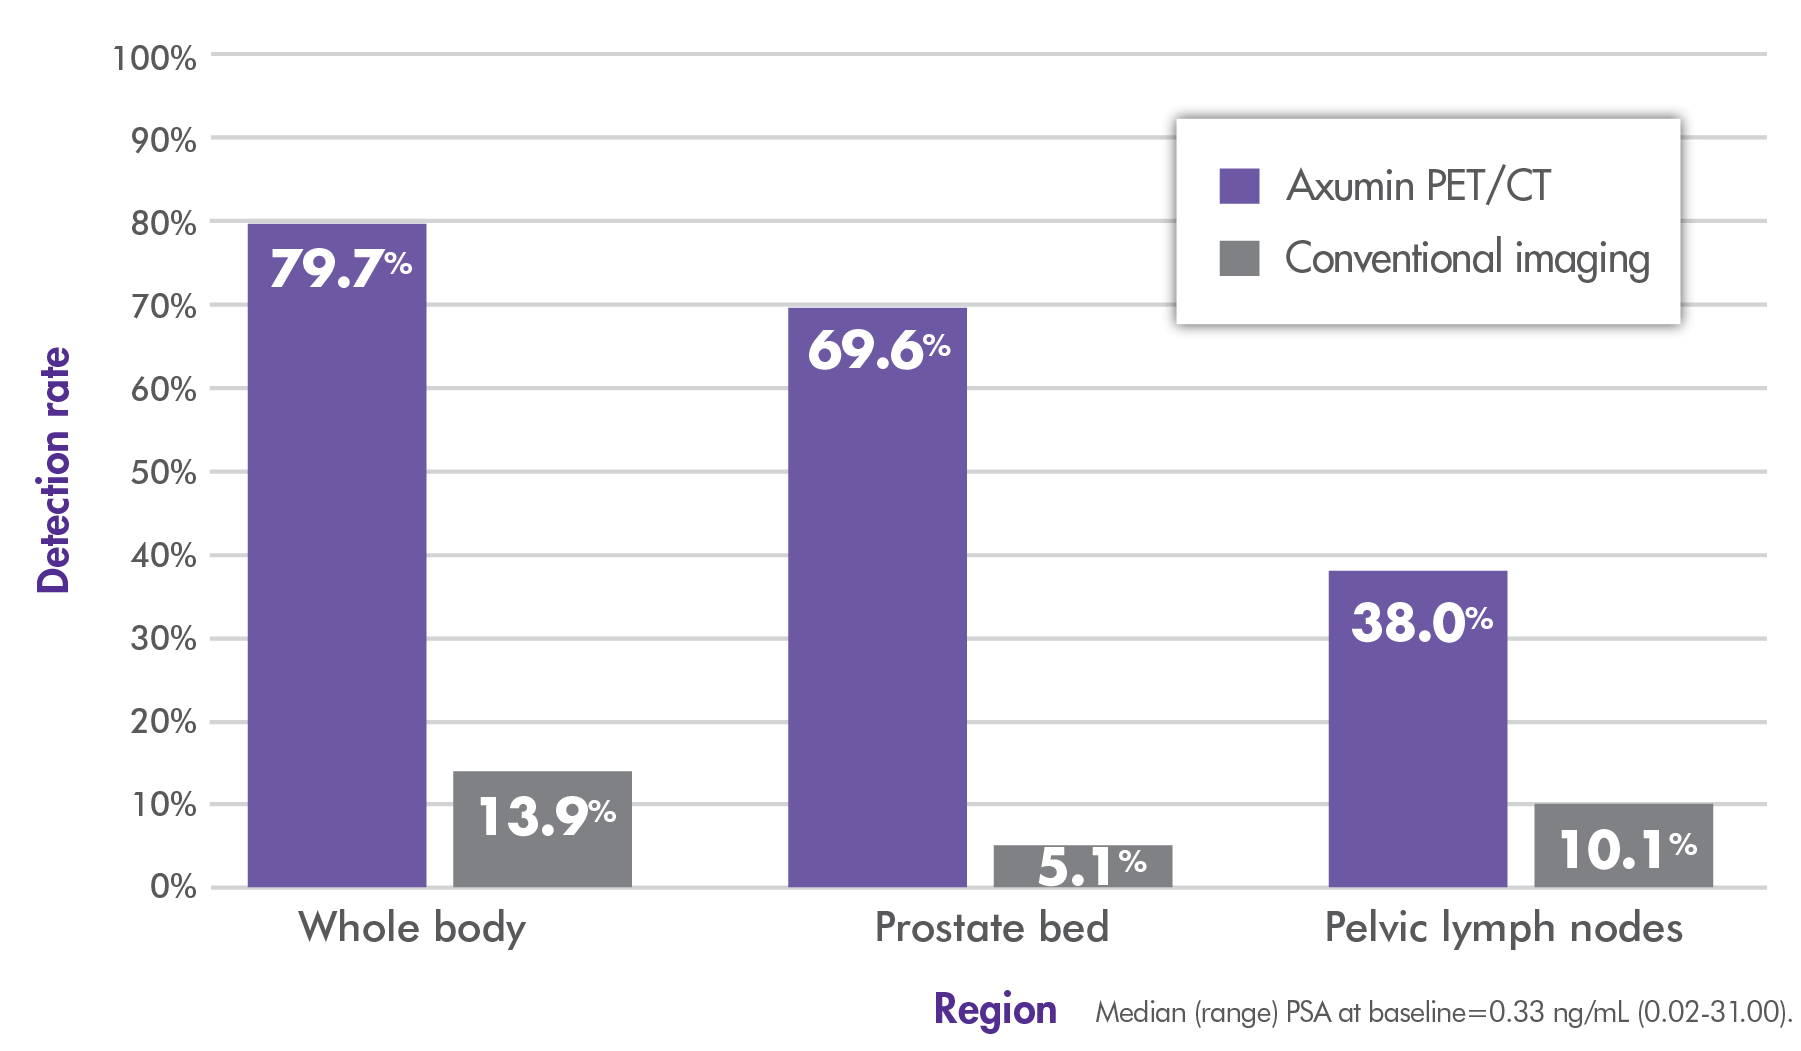 Chart of detection rates with Axumin vs conventional imaging